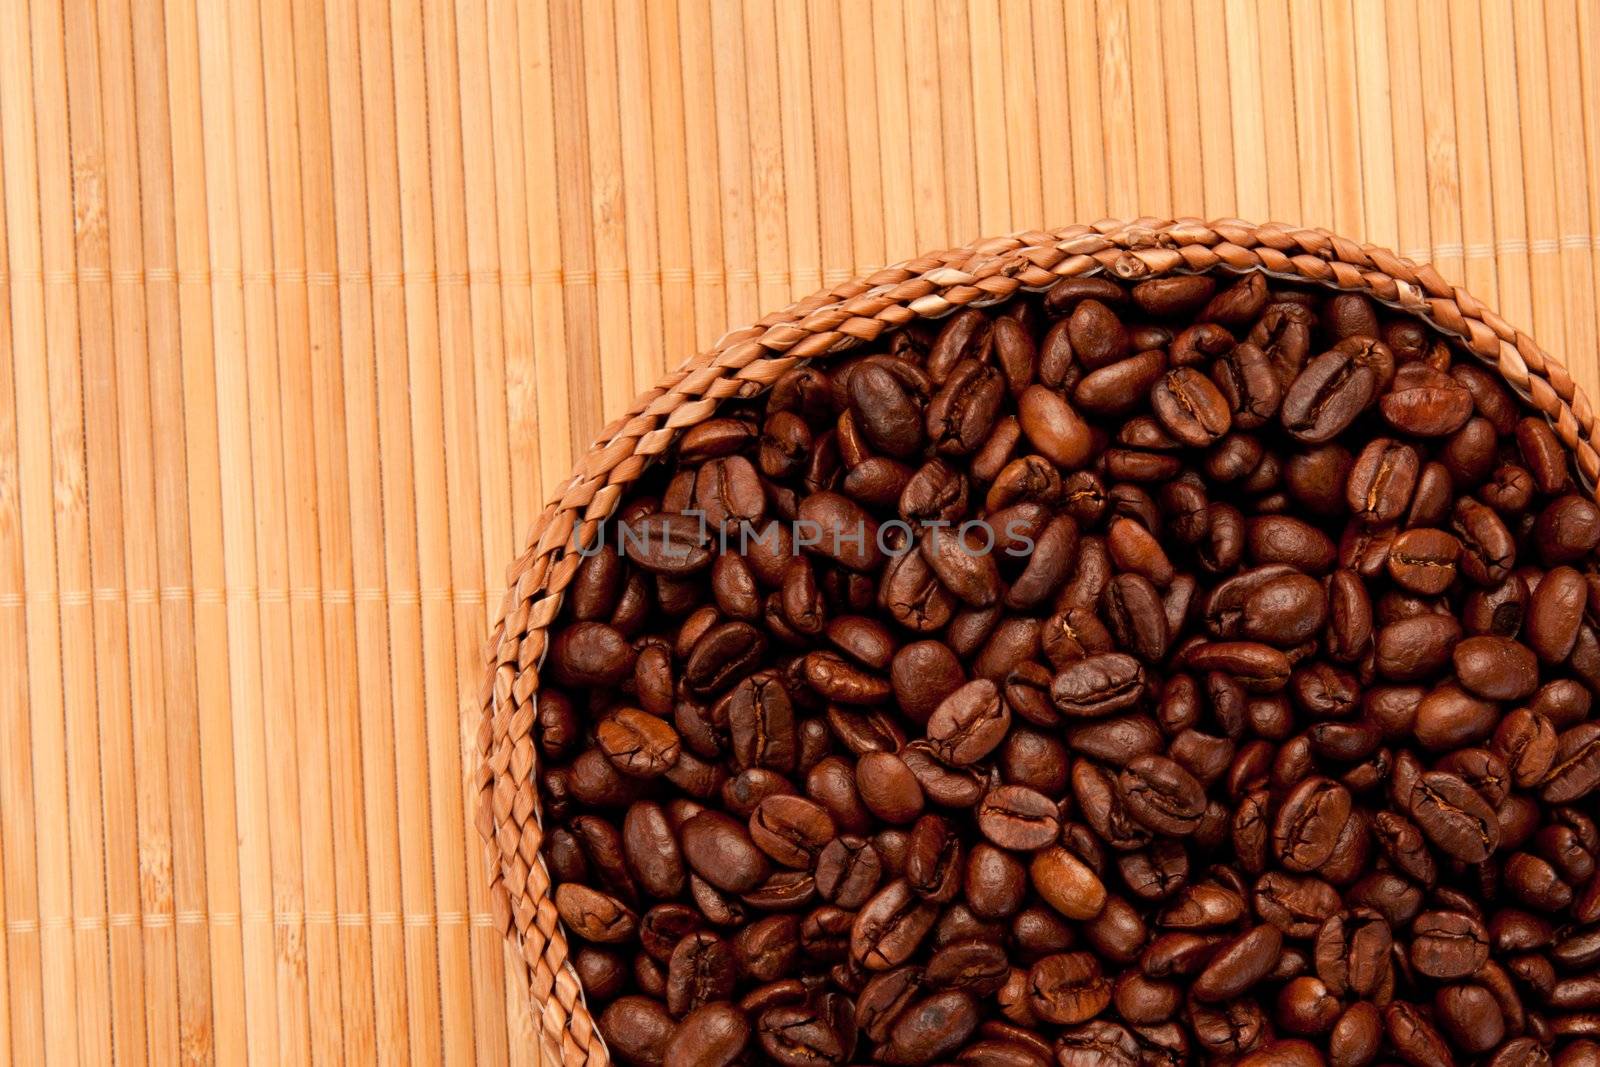 Close up of a basket filled with coffee beans